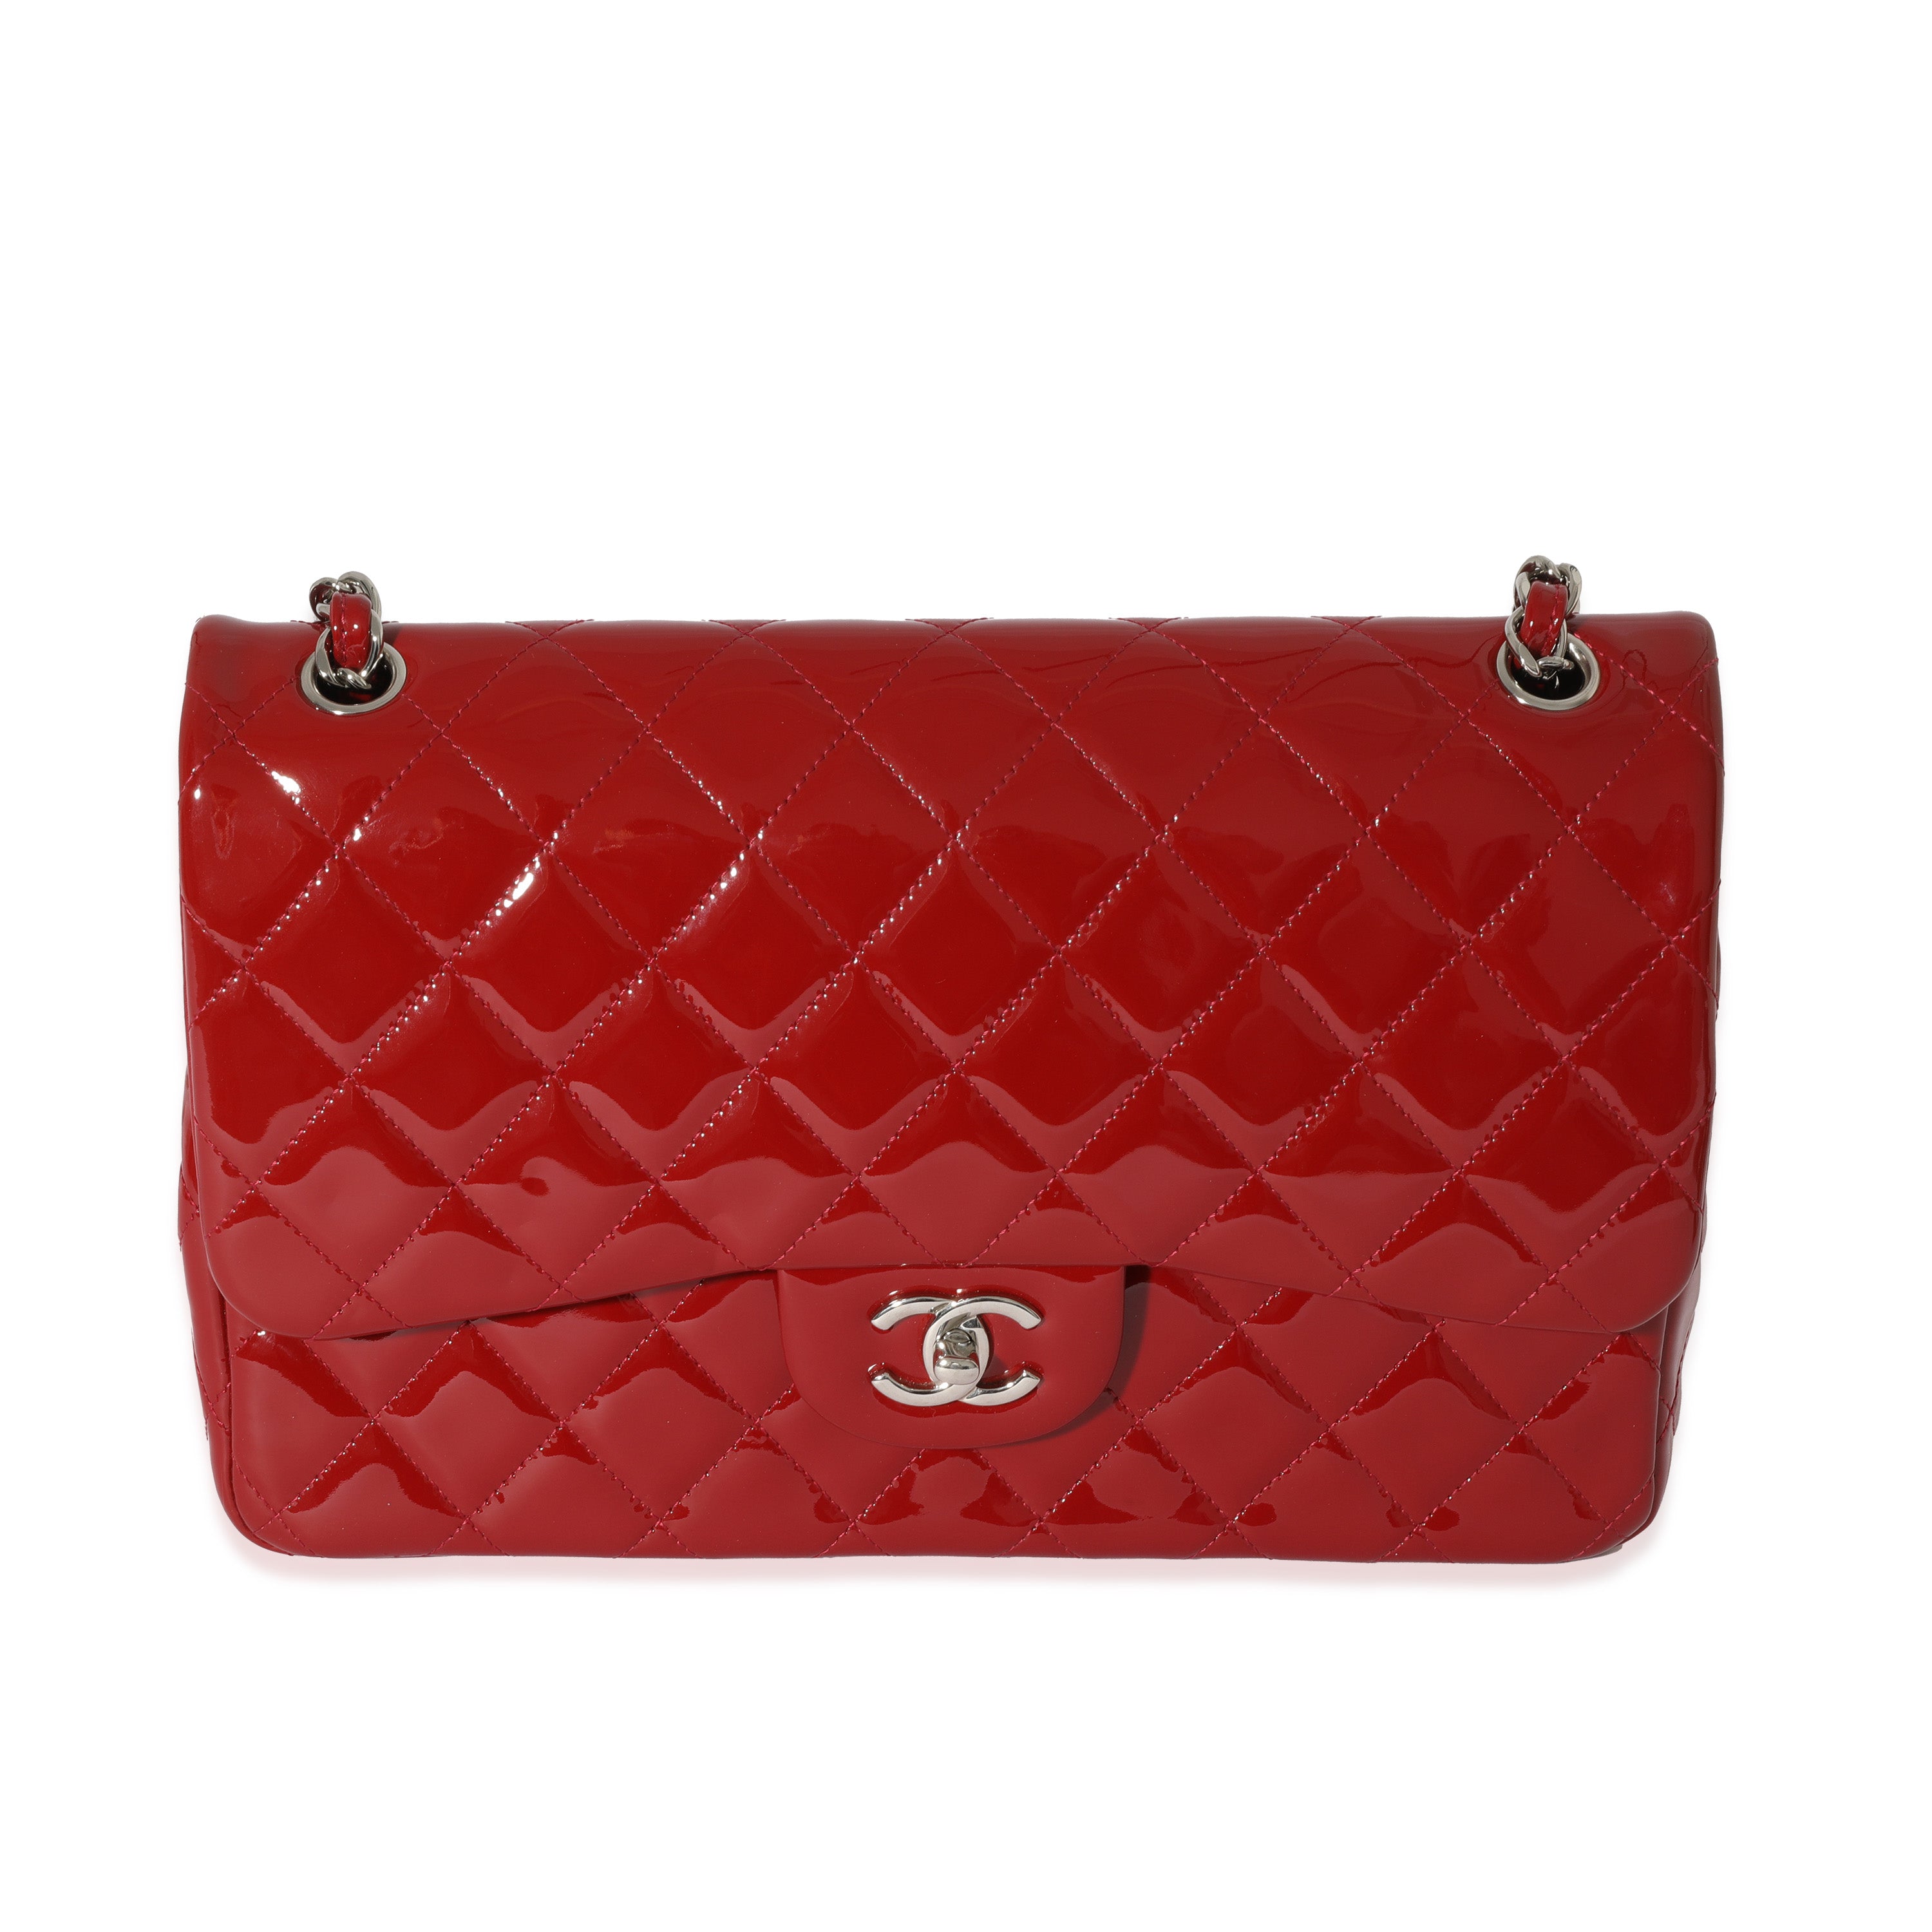 Chanel Red White Blue Quilted Caviar Large Filigree Vanity Case, myGemma, QA